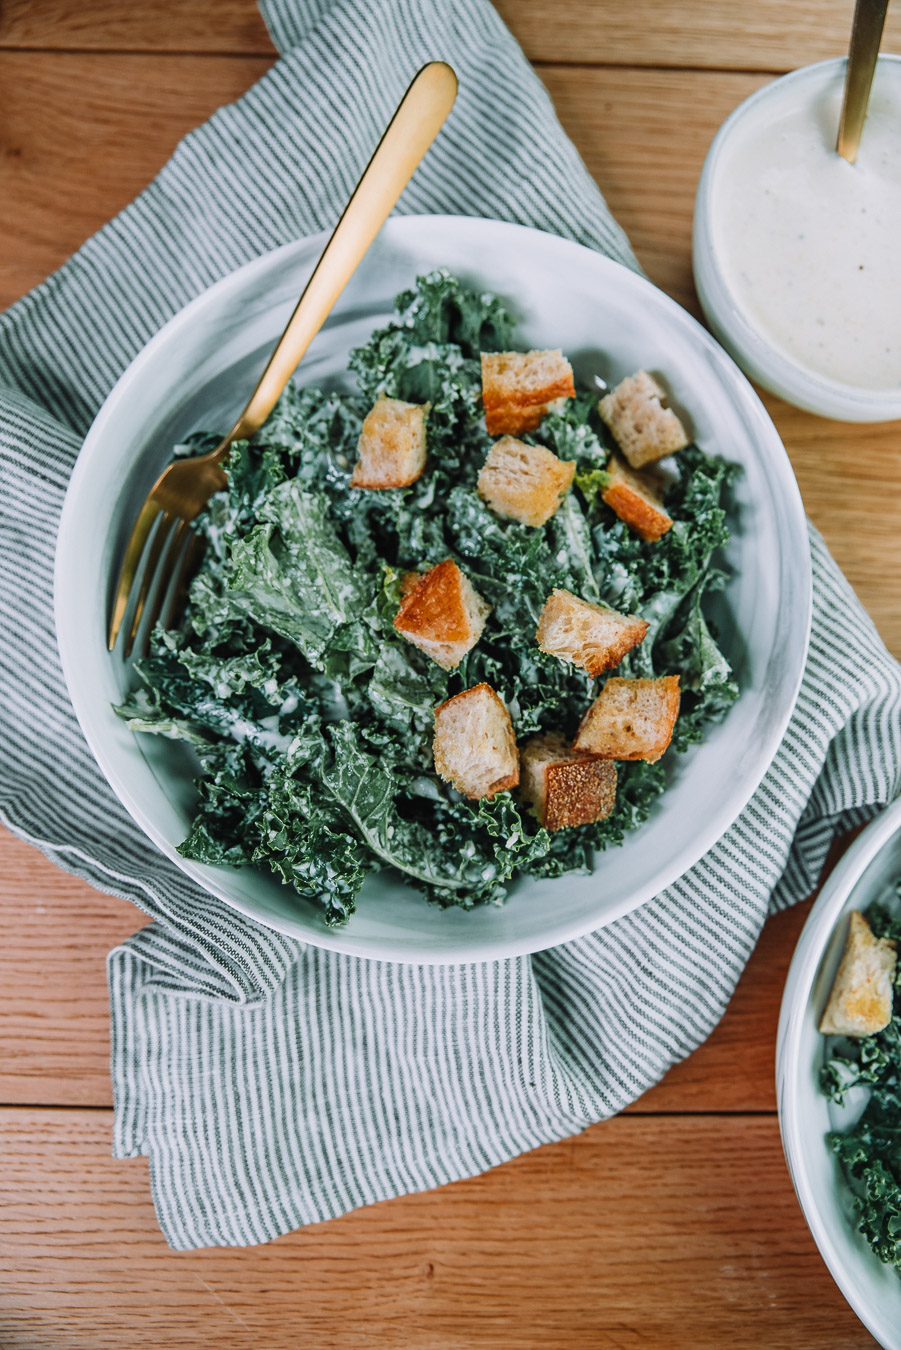 Kale Caesar Salad with fresh baked croutons in a white bowl on a wood table with a kitchen towel. Kale Caesar salad recipe by Farmer's Market Society.  Market Inspired Meals.